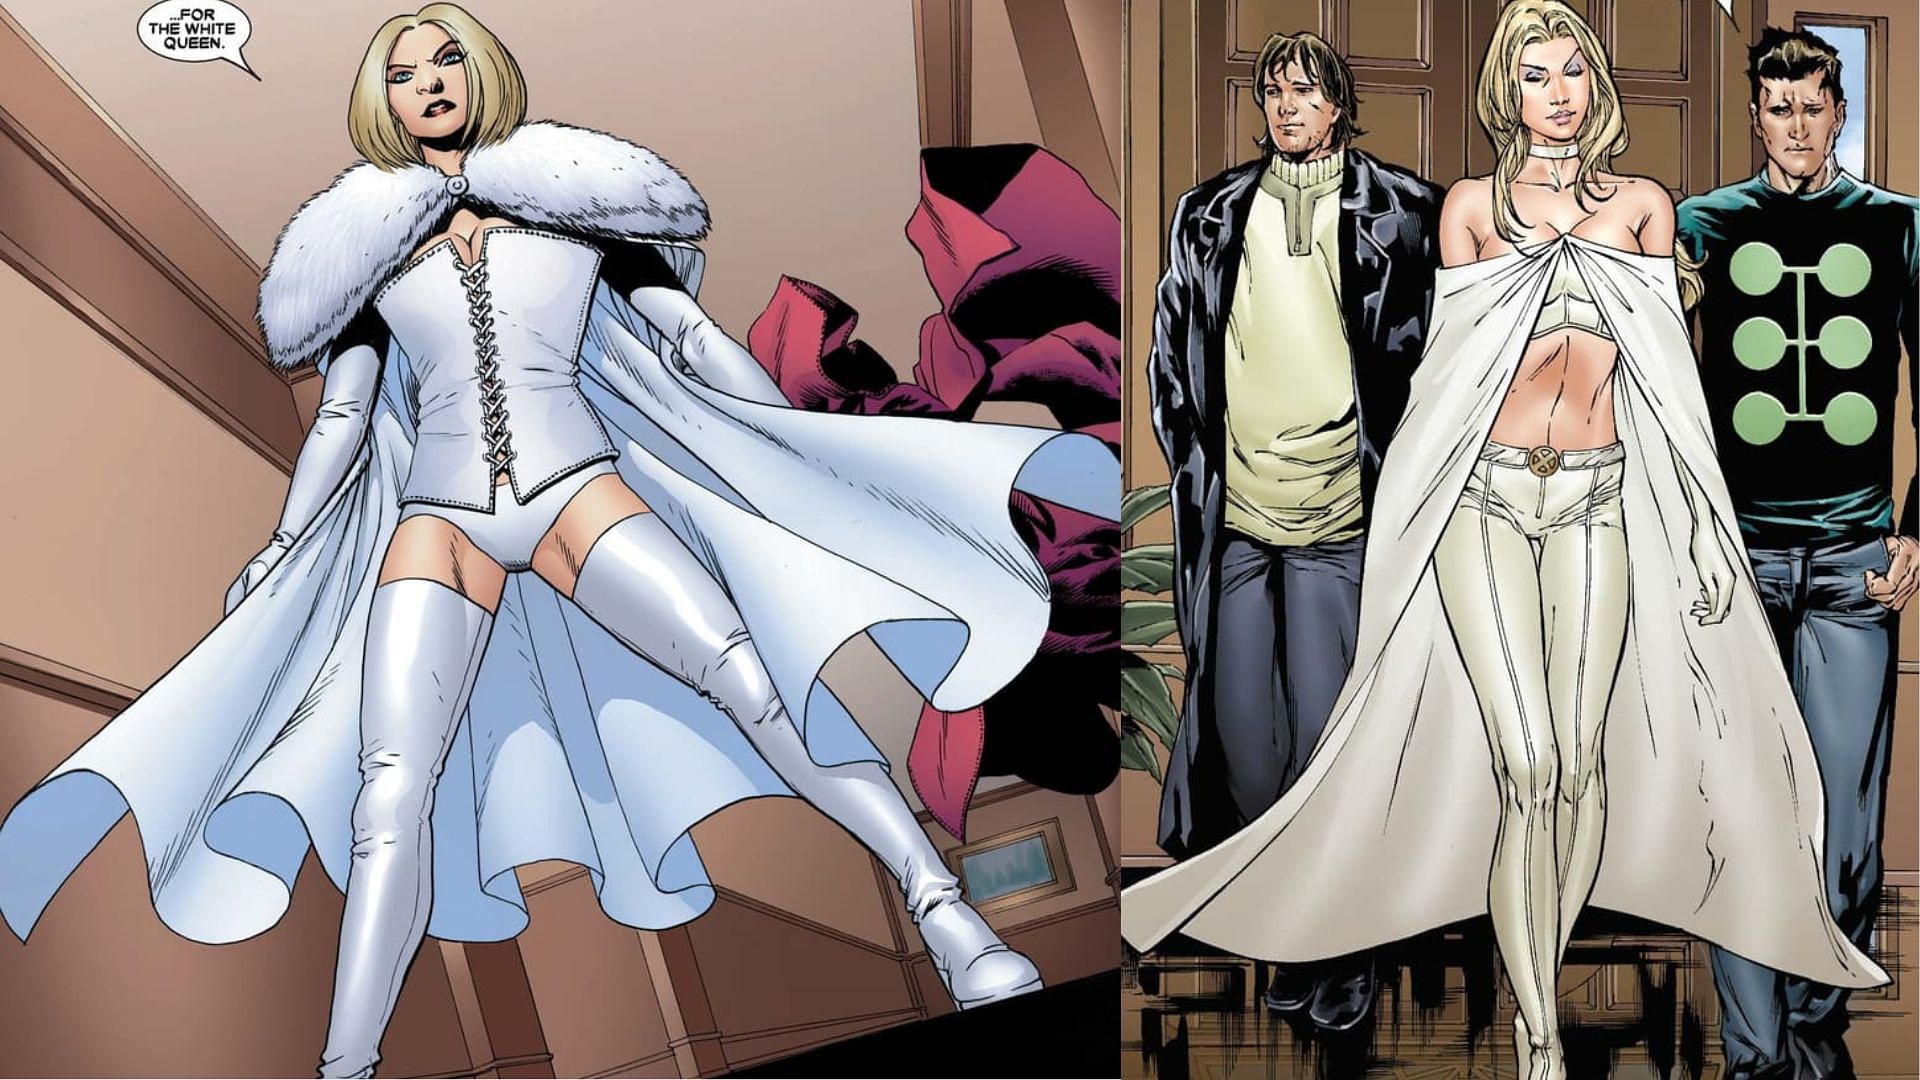 The greatest strength of Emma Frost is reading and influencing minds (Image via Marvel)